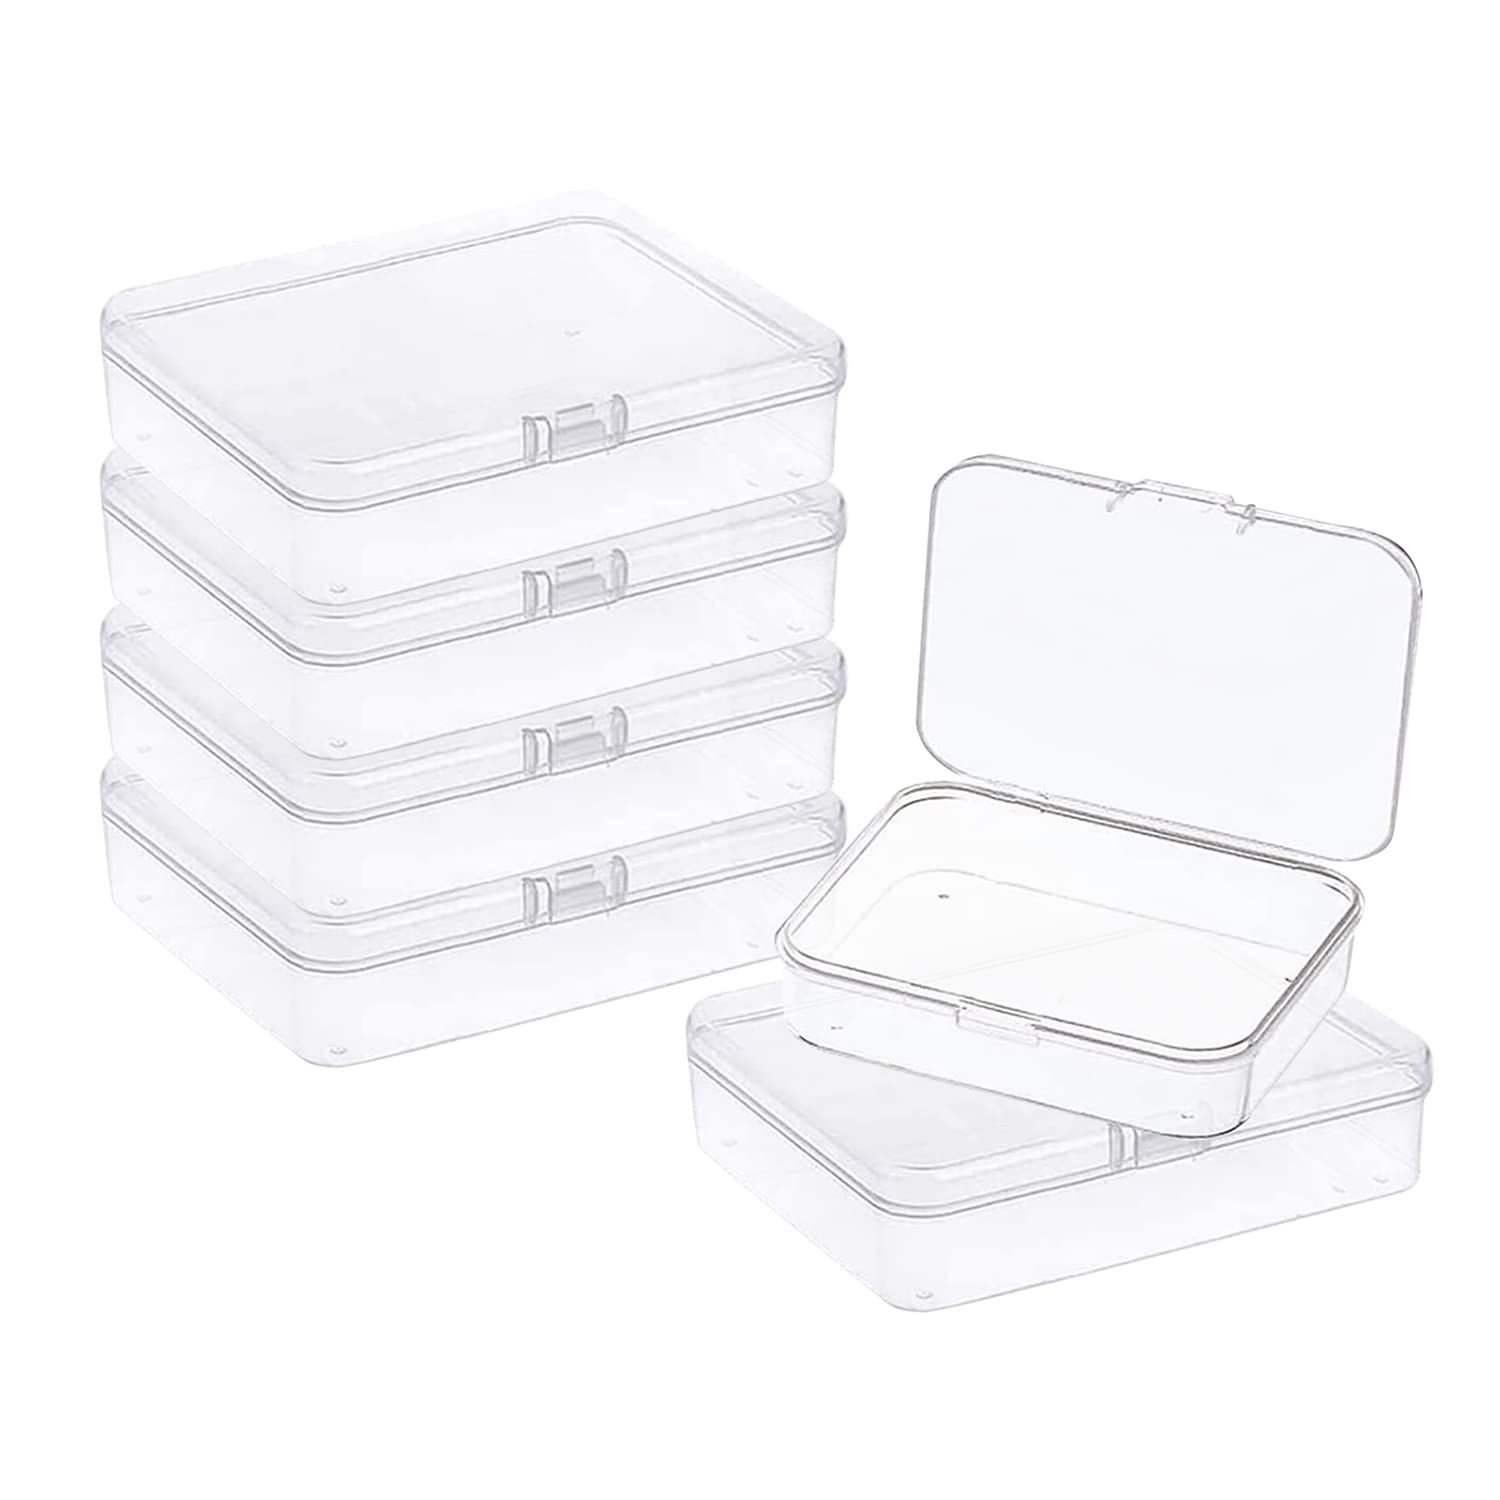 5 Pcs Clear Rectangle Small Storage Boxes with Lid Containers